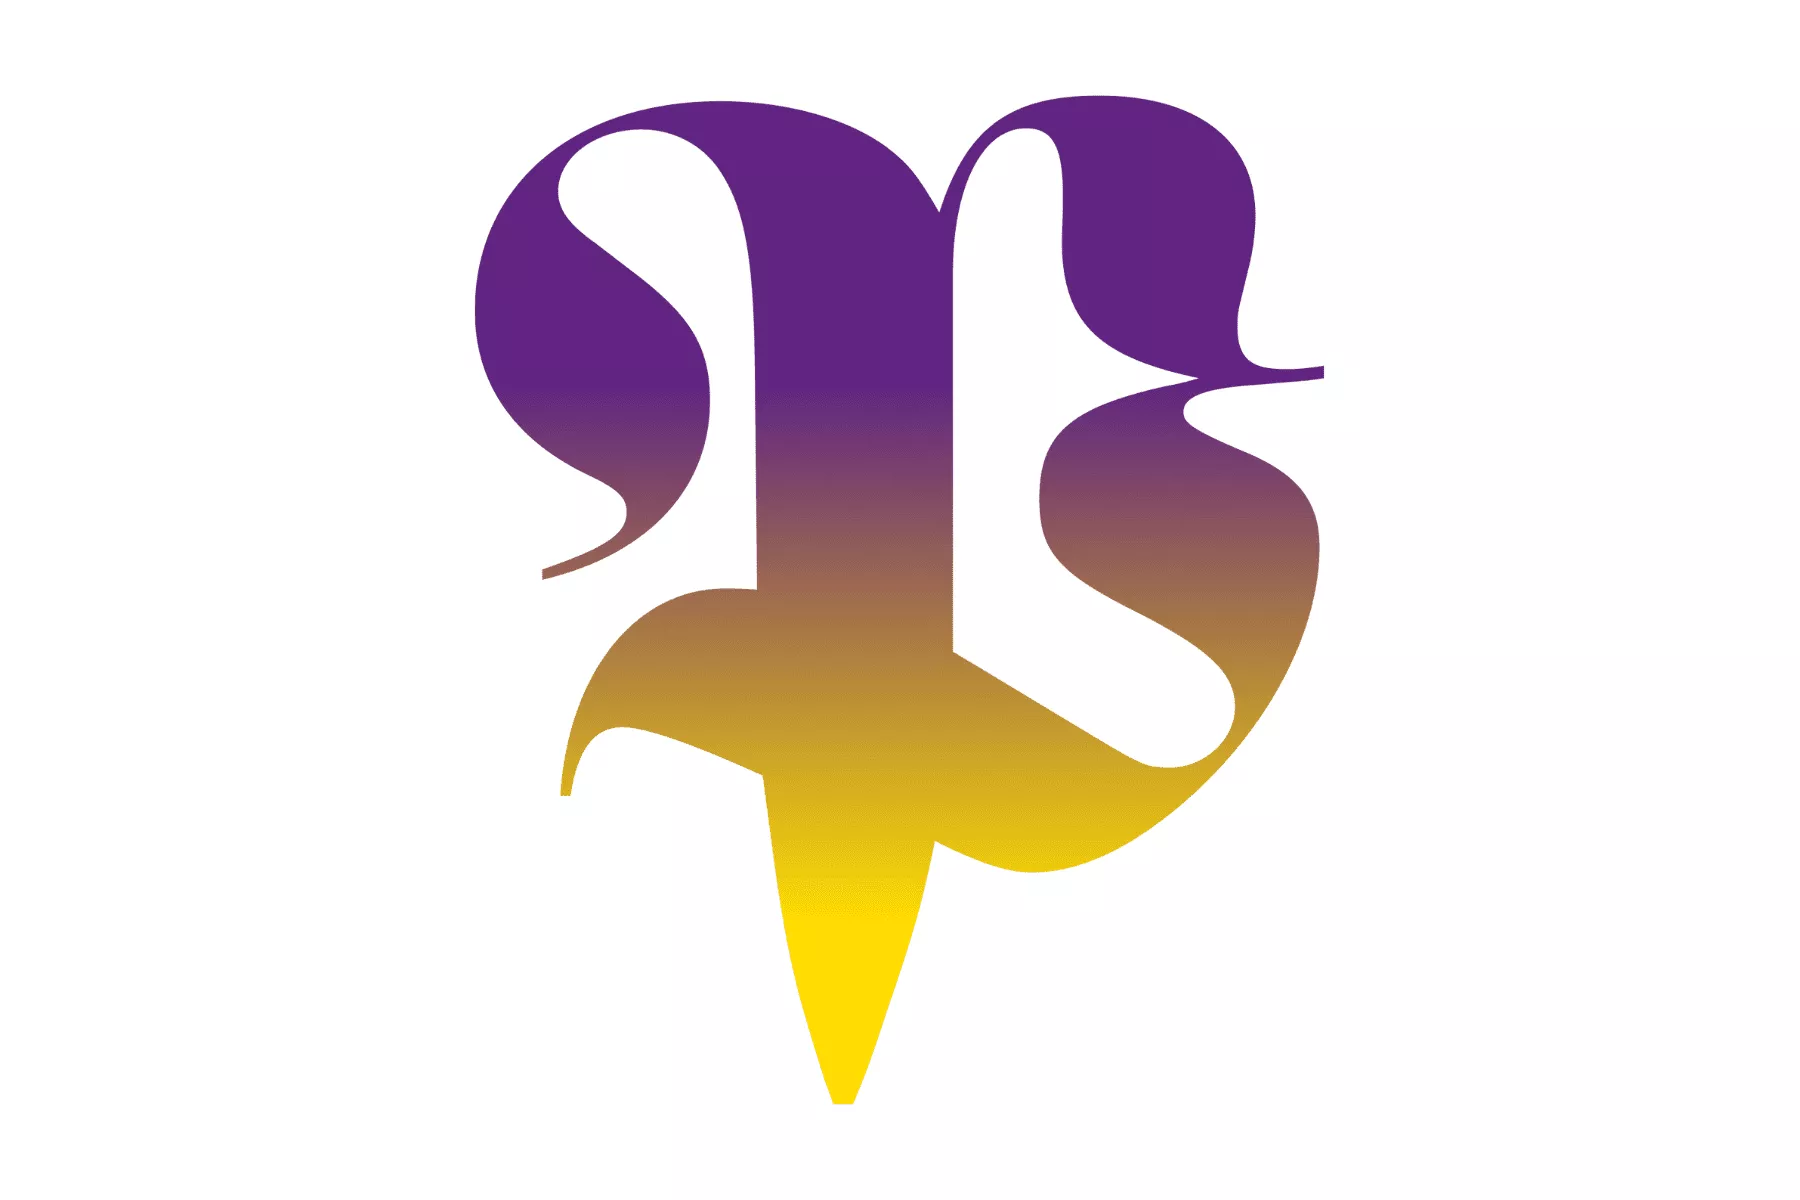 An image of the letter P in a purple to yellow gradient